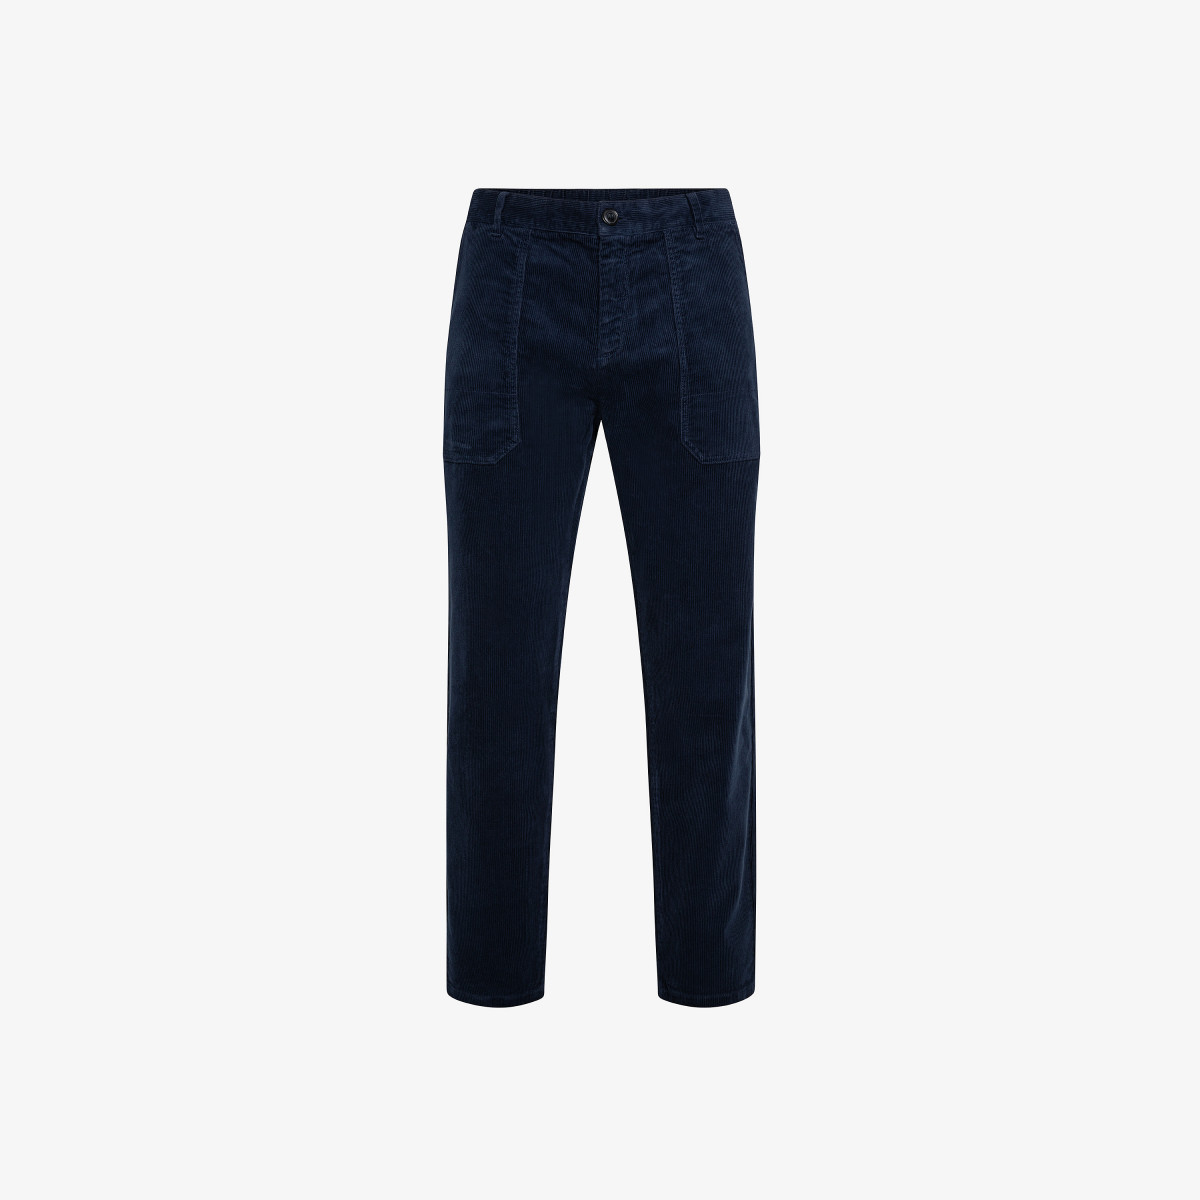 PANT COULISSE CORDUROY NAVY BLUE